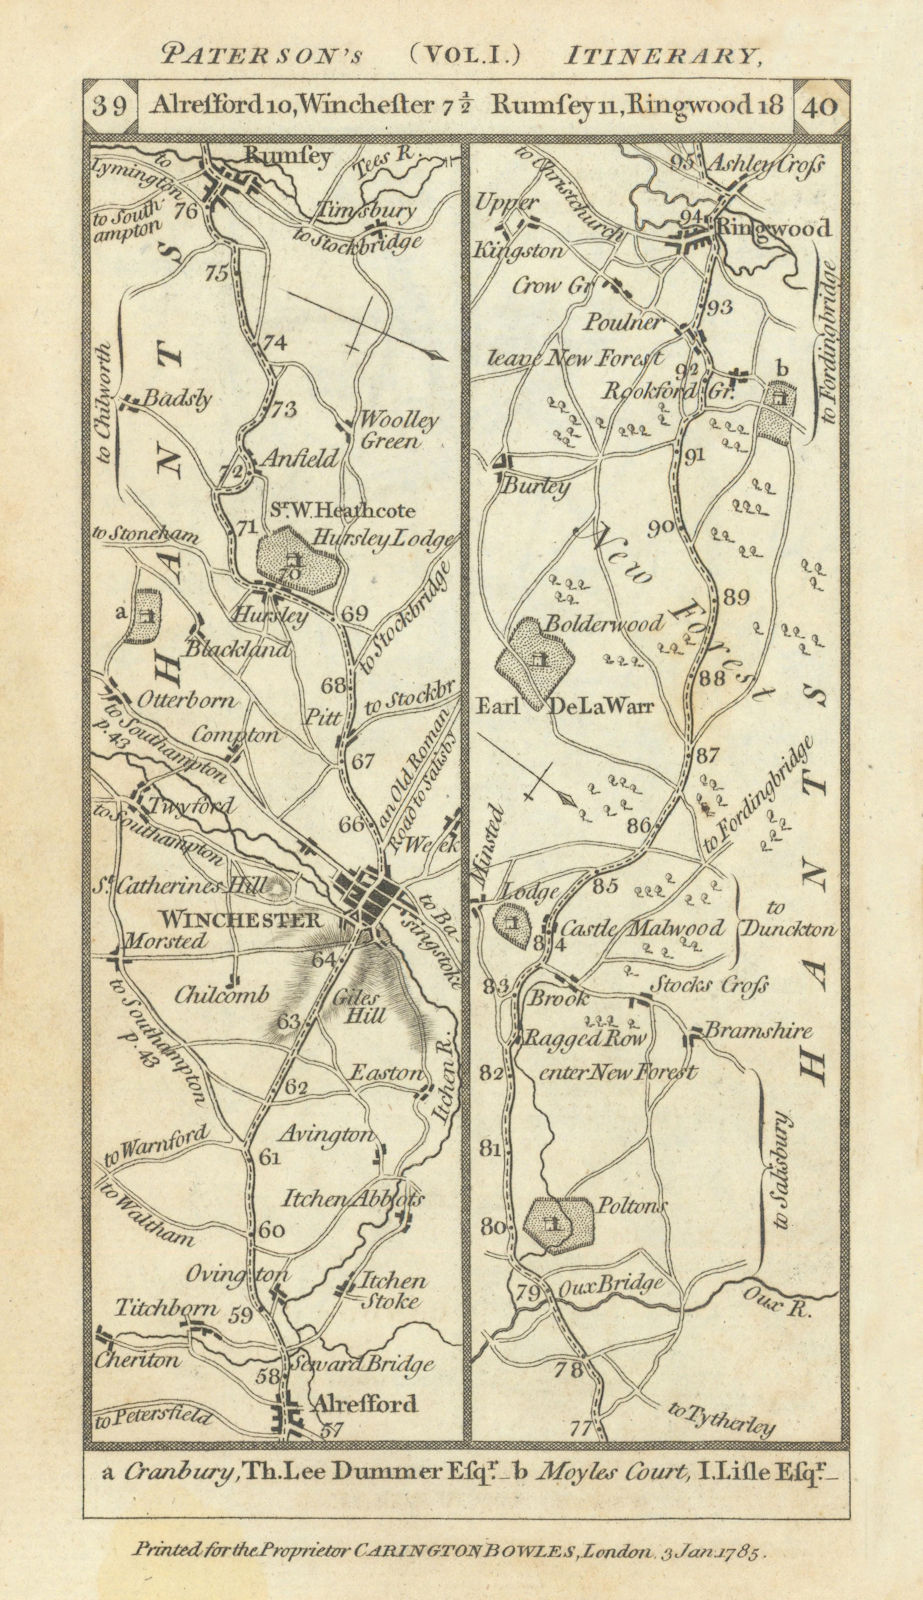 Associate Product Alresford - Winchester - Romsey - Ringwood road strip map PATERSON 1785